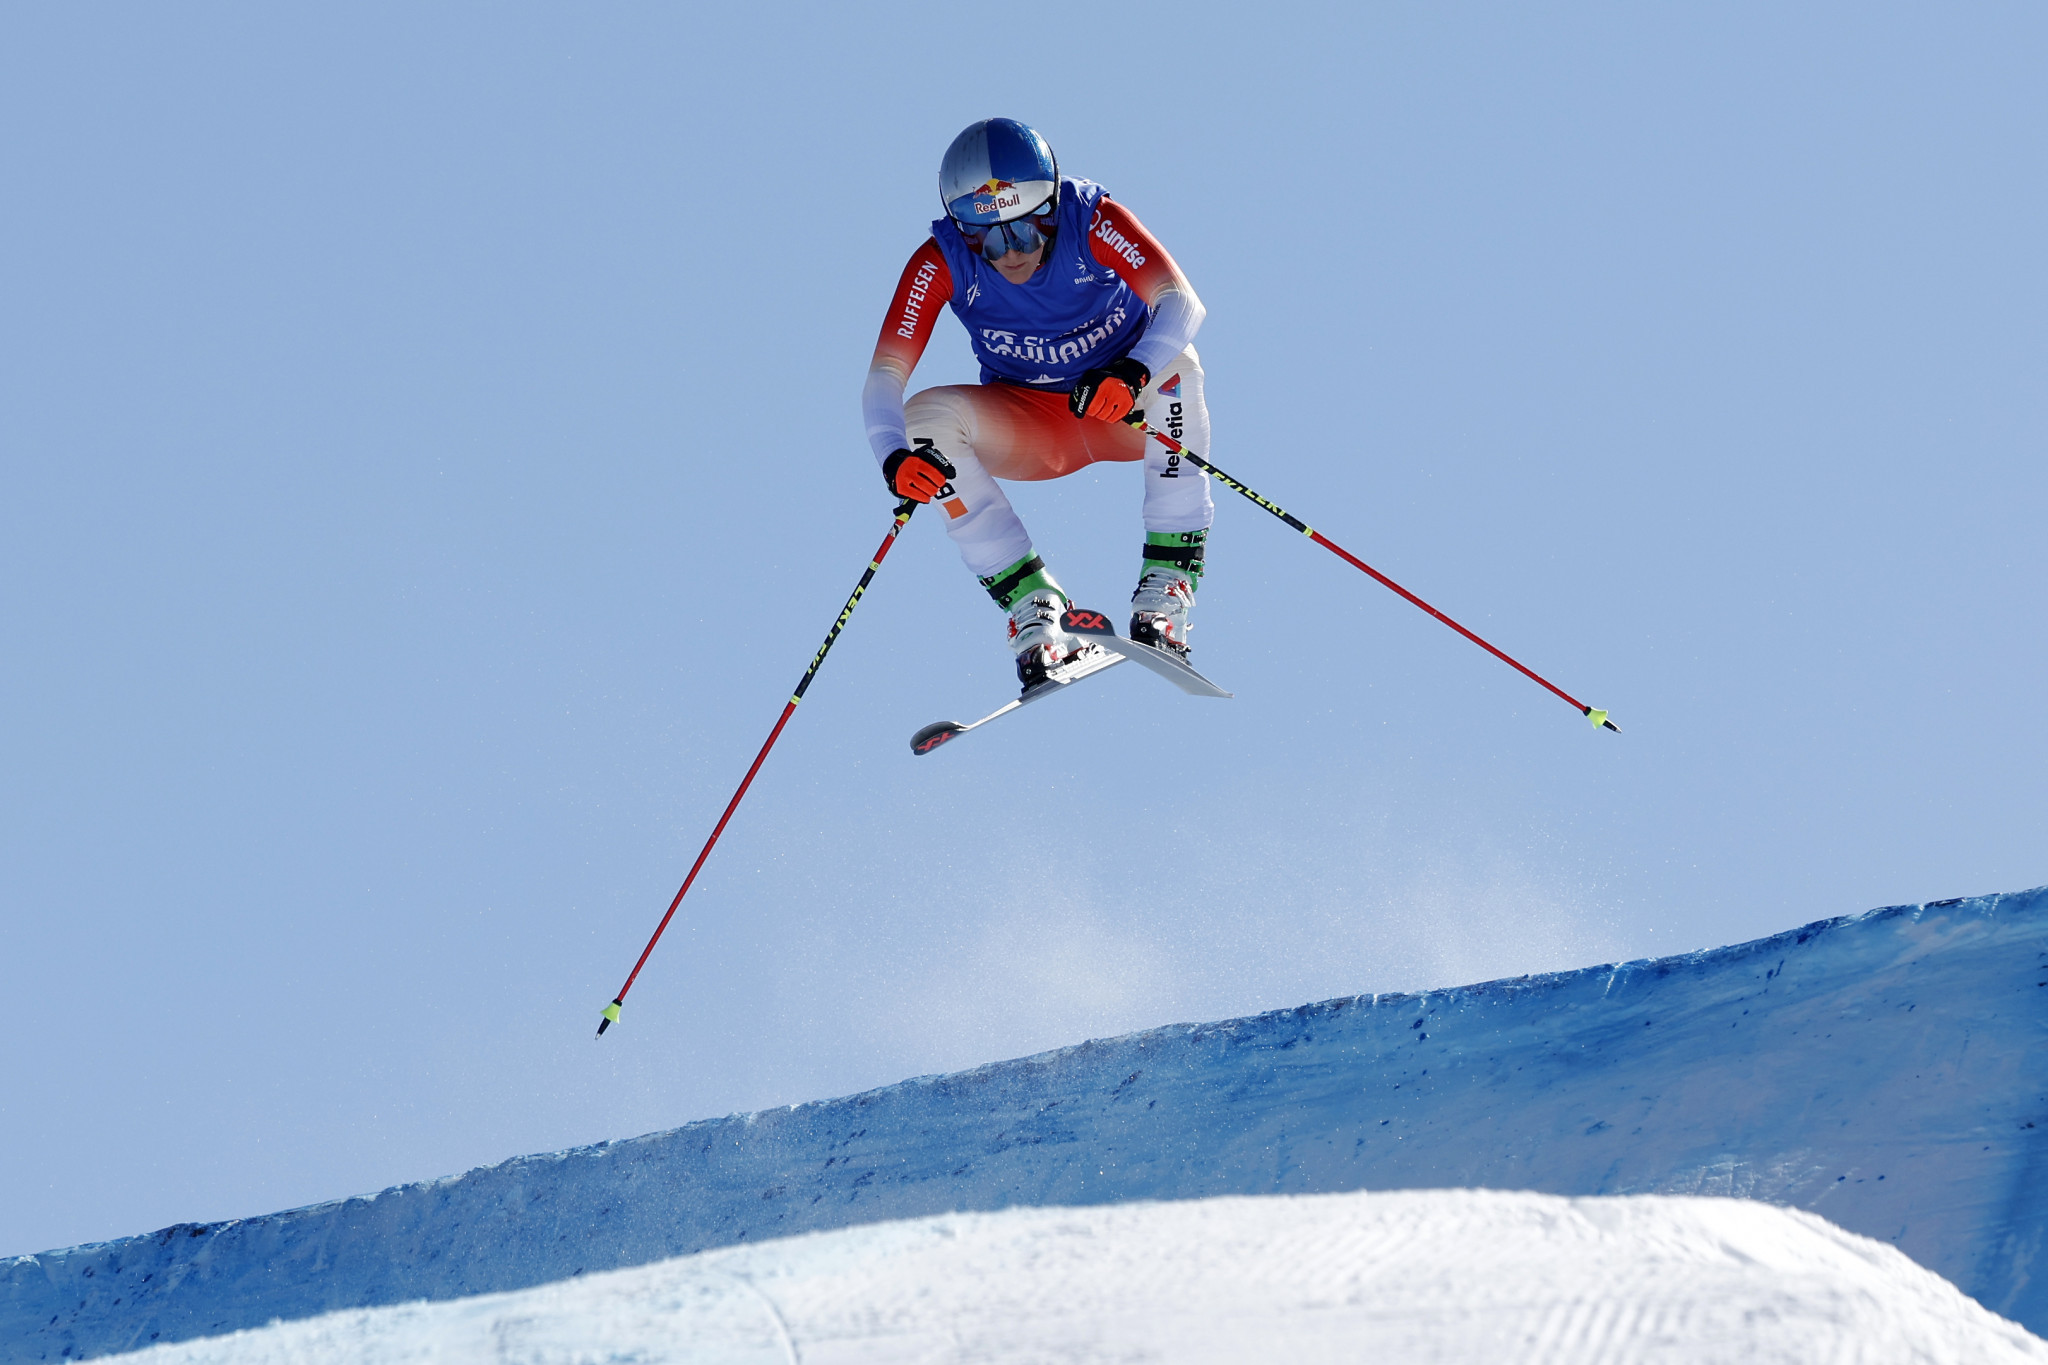 Fanny Smith won FIS Ski Cross World Cup gold today in Veysonnaz ©Getty Images